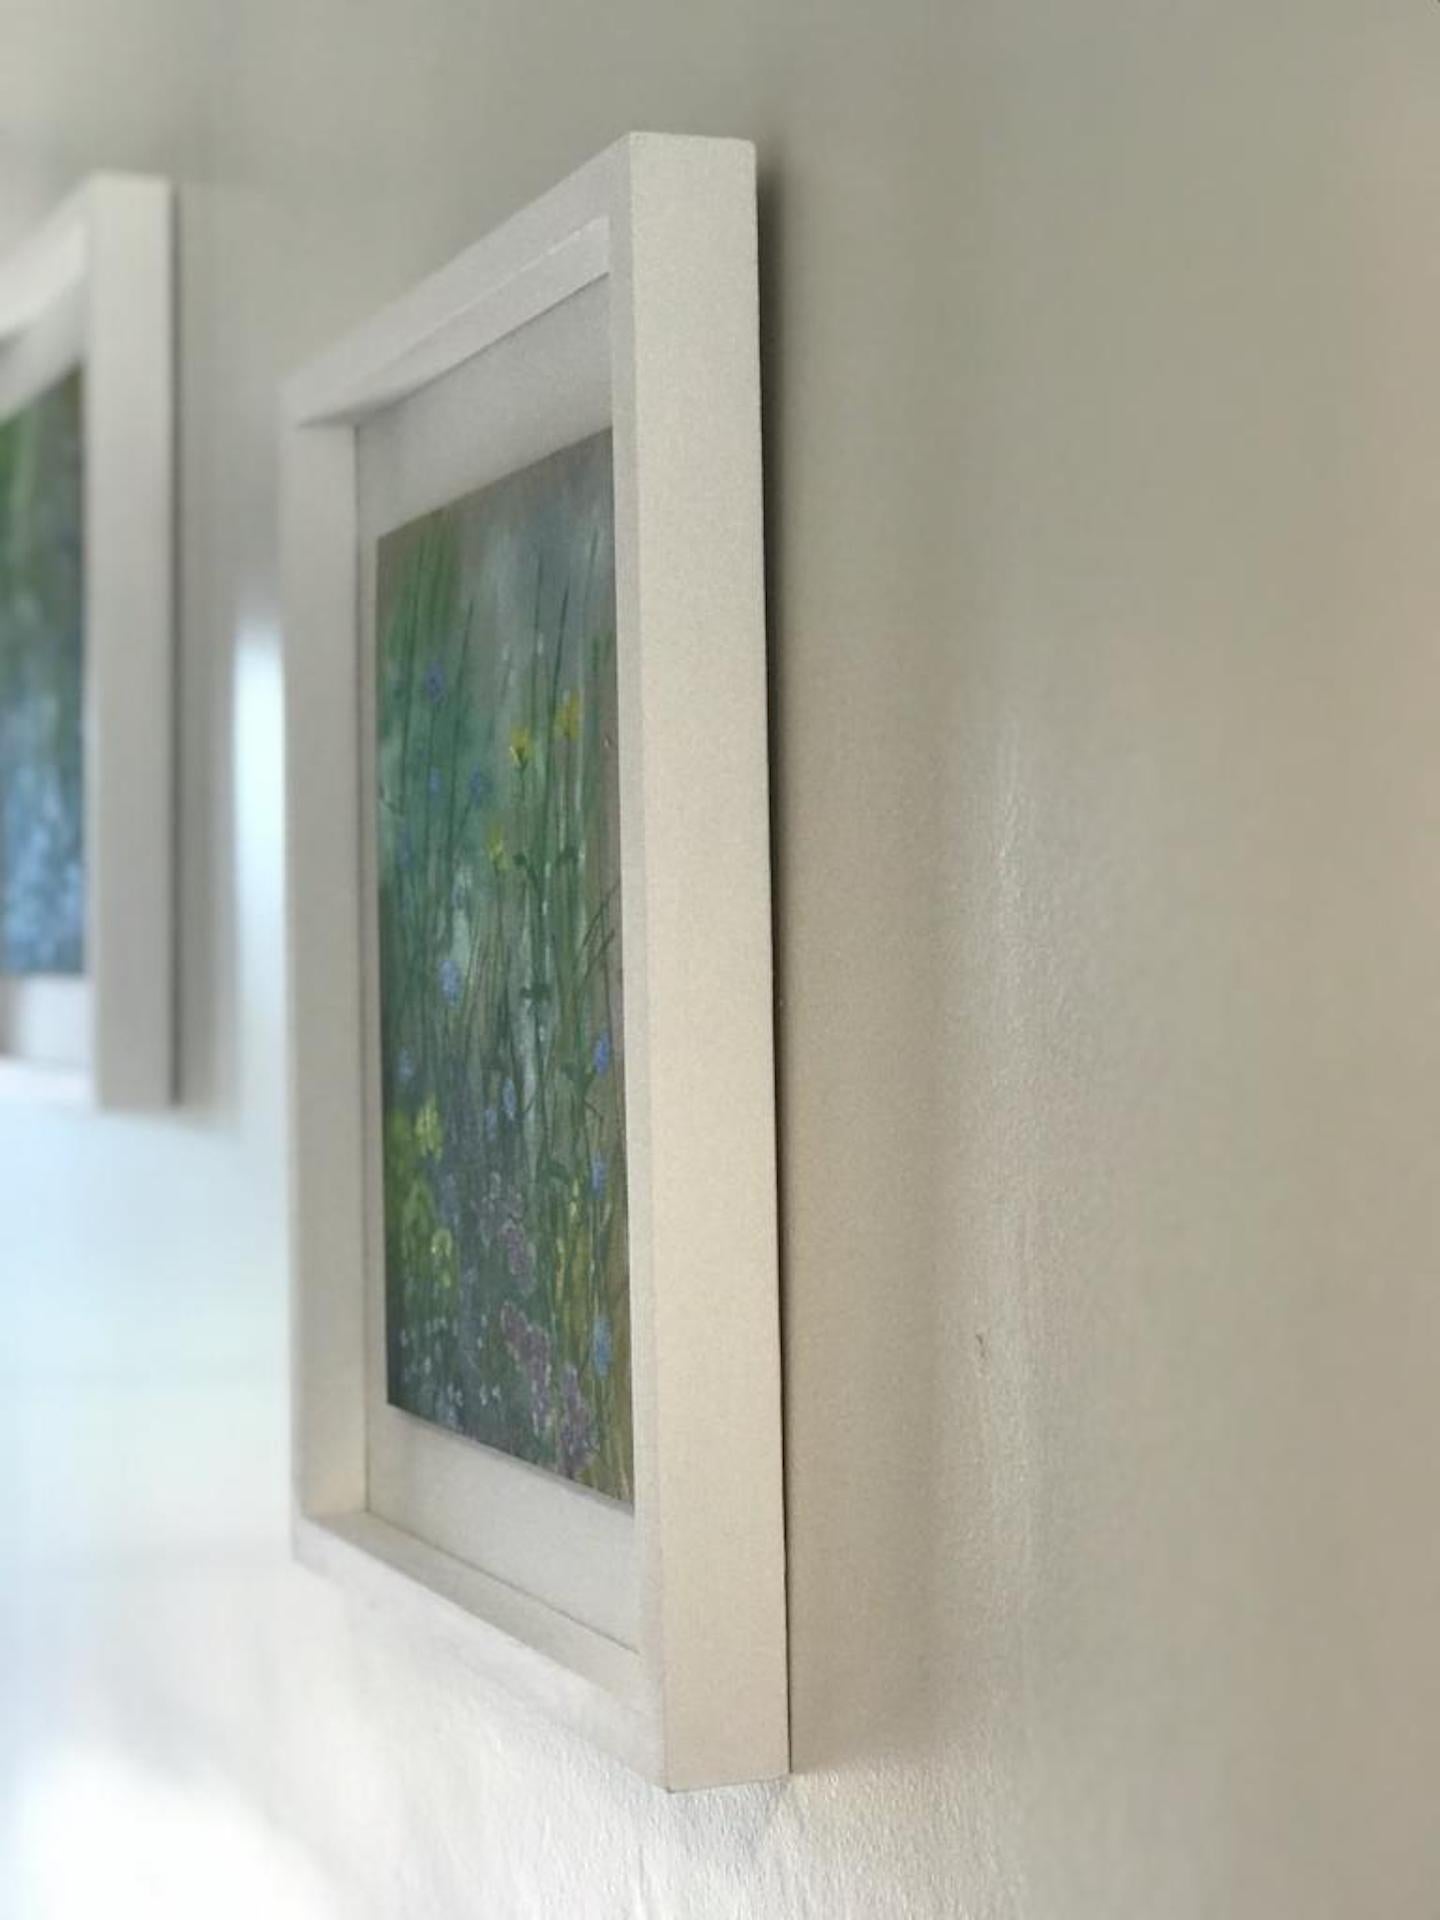 Dylan Lloyd
Island Path Diptych
Original Oil Paintings on Canvas
Oil Paint on Canvas Board
Framed in a White Box Frames
Image size: H 30cm x W 20cm x D 0.5cm
Framed Size: H 42cm x W 32 x D 4cm
Minimum Hanging Space Needed: H 42cm x W 96cm x D